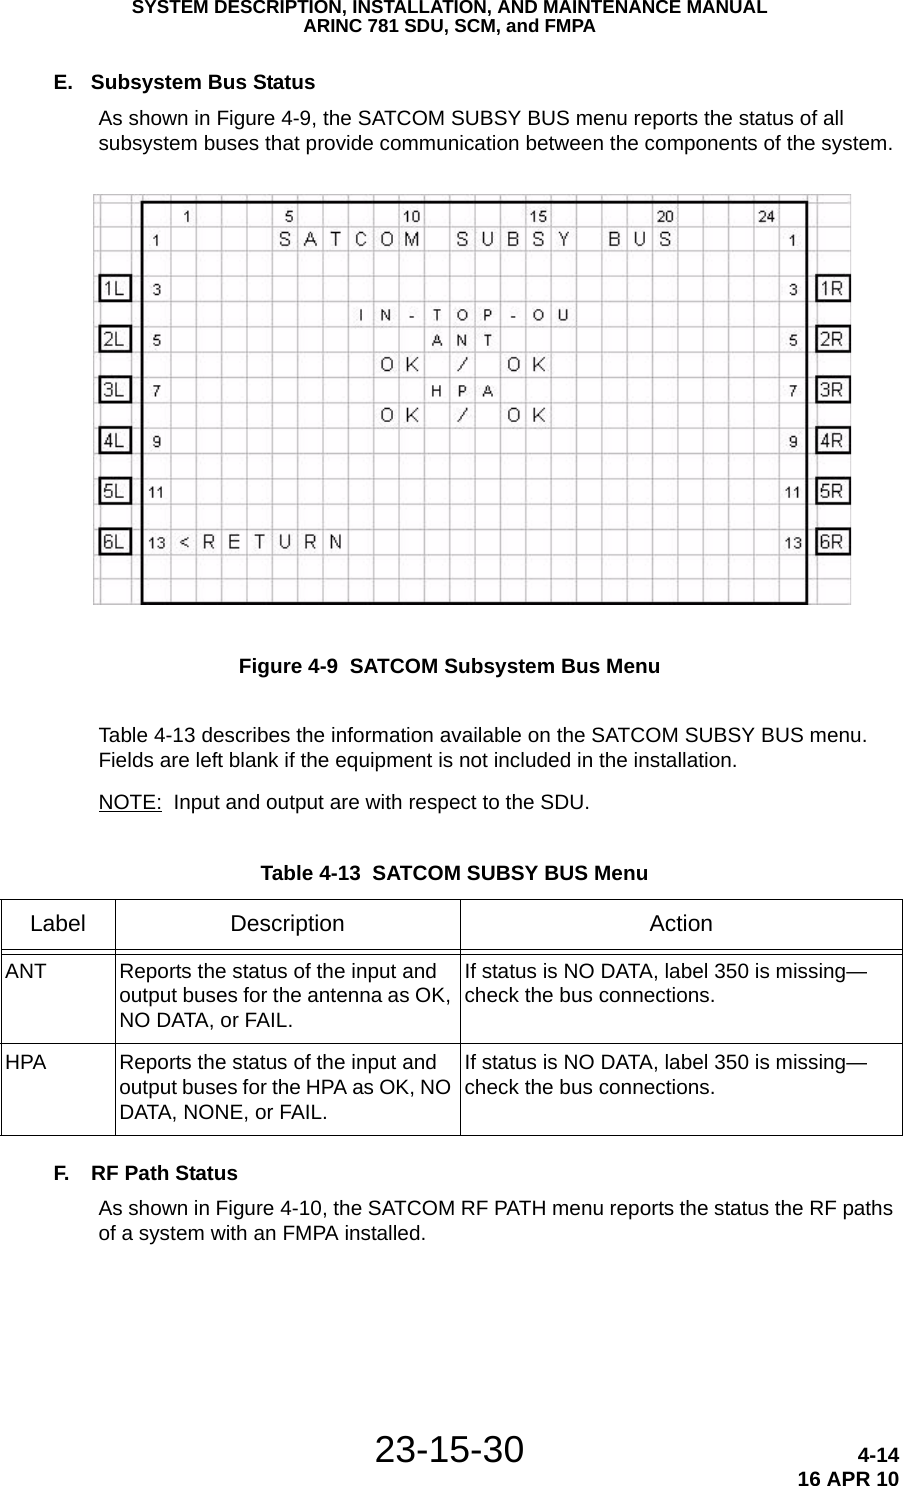 SYSTEM DESCRIPTION, INSTALLATION, AND MAINTENANCE MANUALARINC 781 SDU, SCM, and FMPA23-15-30 4-1416 APR 10E. Subsystem Bus StatusAs shown in Figure 4-9, the SATCOM SUBSY BUS menu reports the status of all subsystem buses that provide communication between the components of the system. Figure 4-9  SATCOM Subsystem Bus MenuTable 4-13 describes the information available on the SATCOM SUBSY BUS menu. Fields are left blank if the equipment is not included in the installation.NOTE: Input and output are with respect to the SDU.F. RF Path StatusAs shown in Figure 4-10, the SATCOM RF PATH menu reports the status the RF paths of a system with an FMPA installed. Table 4-13  SATCOM SUBSY BUS Menu Label Description ActionANT Reports the status of the input and output buses for the antenna as OK, NO DATA, or FAIL.If status is NO DATA, label 350 is missing—check the bus connections.HPA Reports the status of the input and output buses for the HPA as OK, NO DATA, NONE, or FAIL.If status is NO DATA, label 350 is missing—check the bus connections.